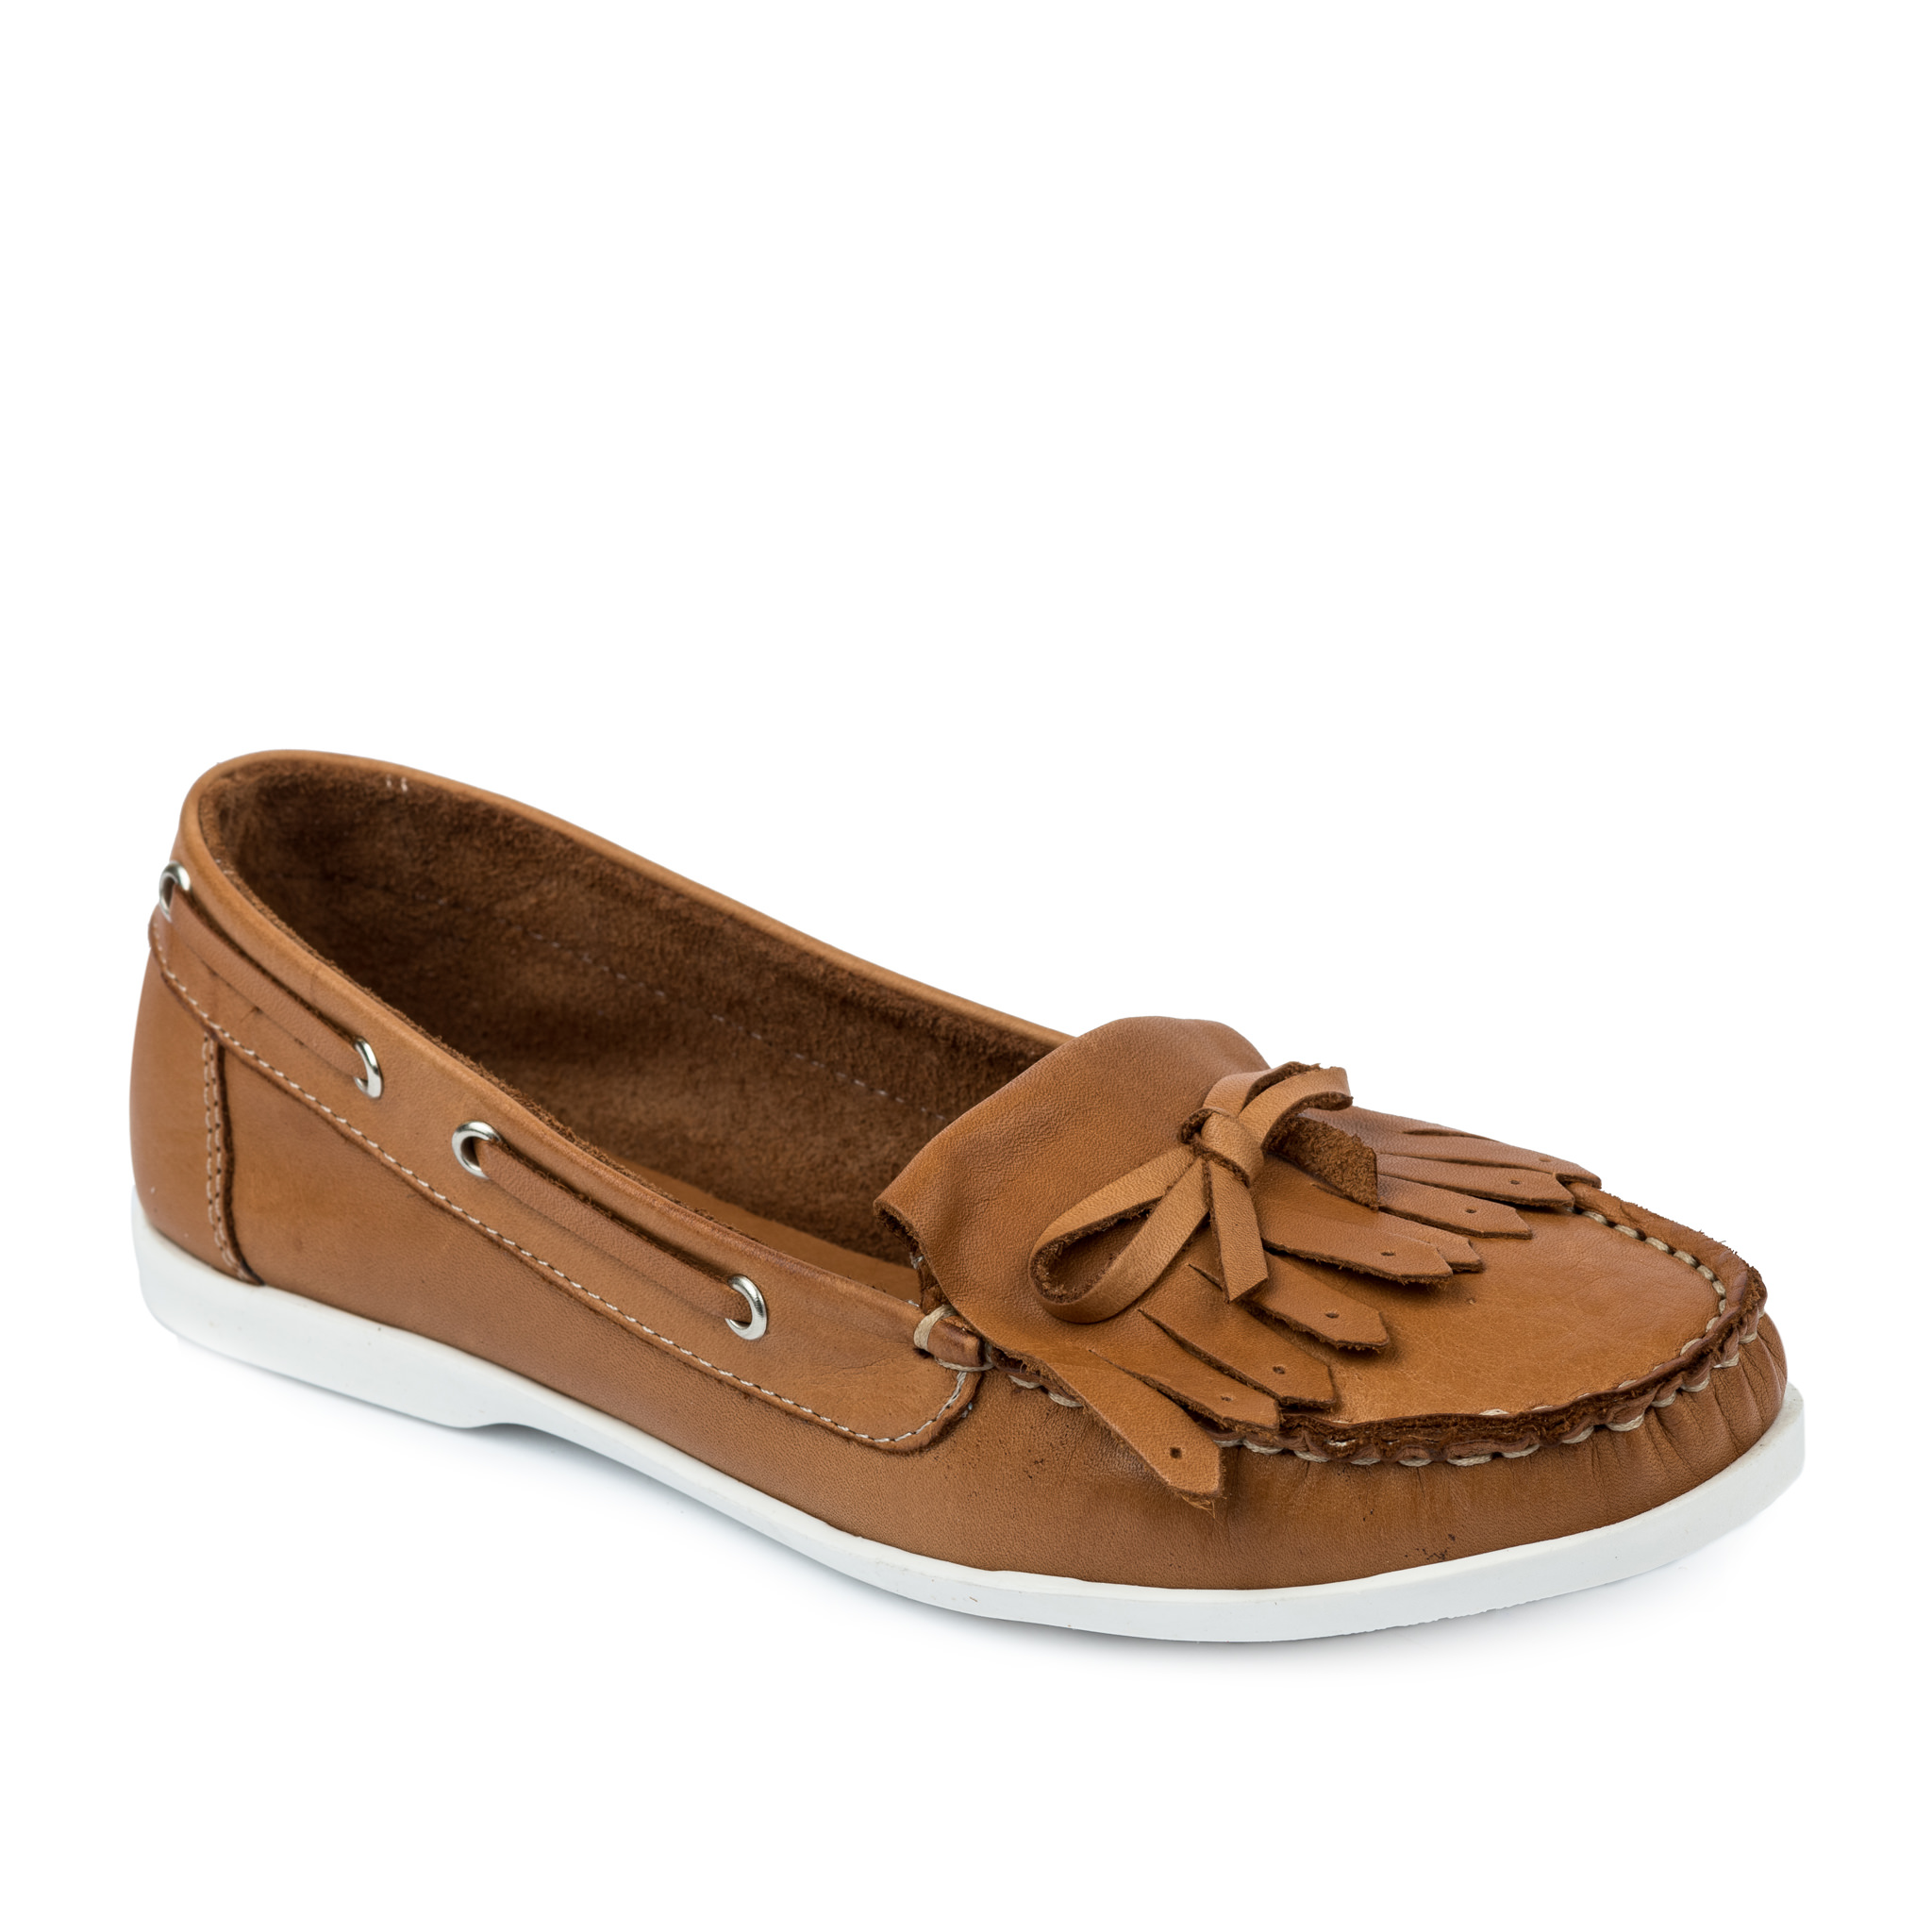 Leather moccasins A599 - CAMEL